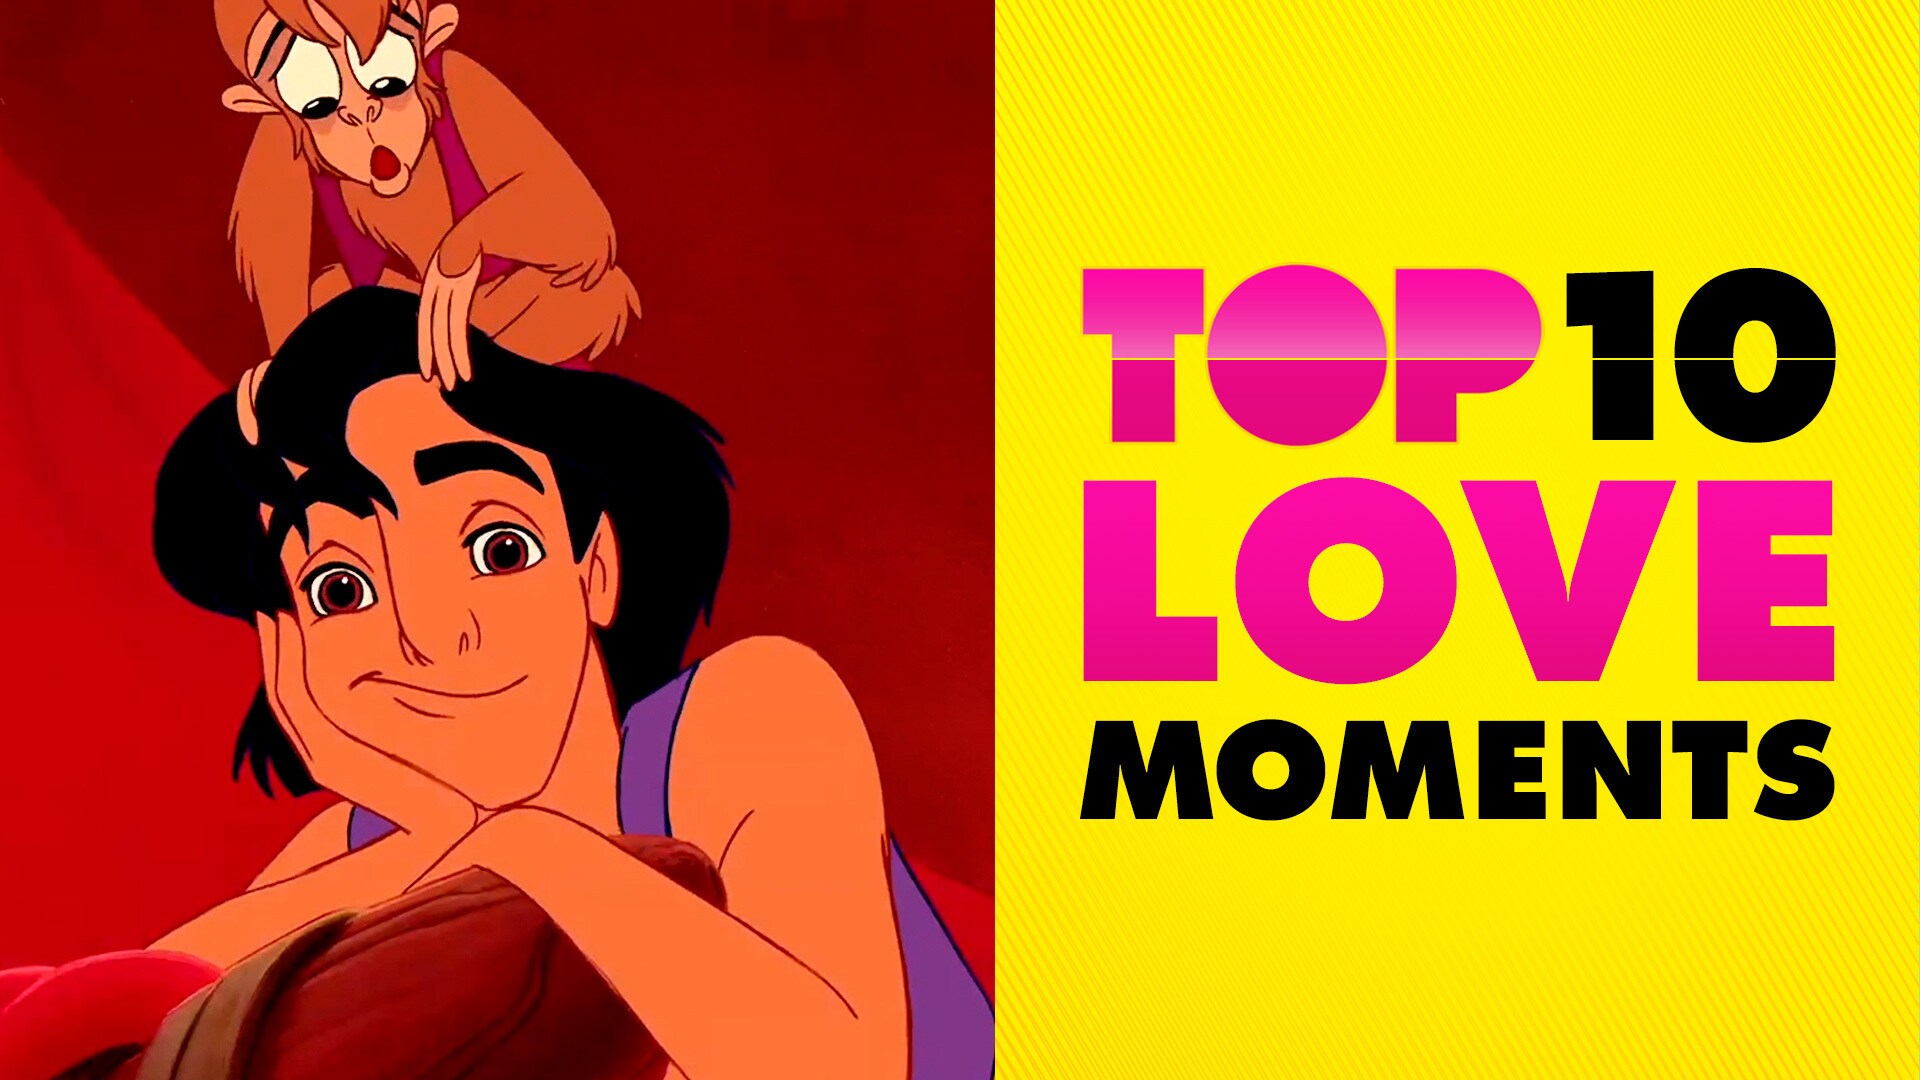 Love At First Sight Moments | Disney Top 10